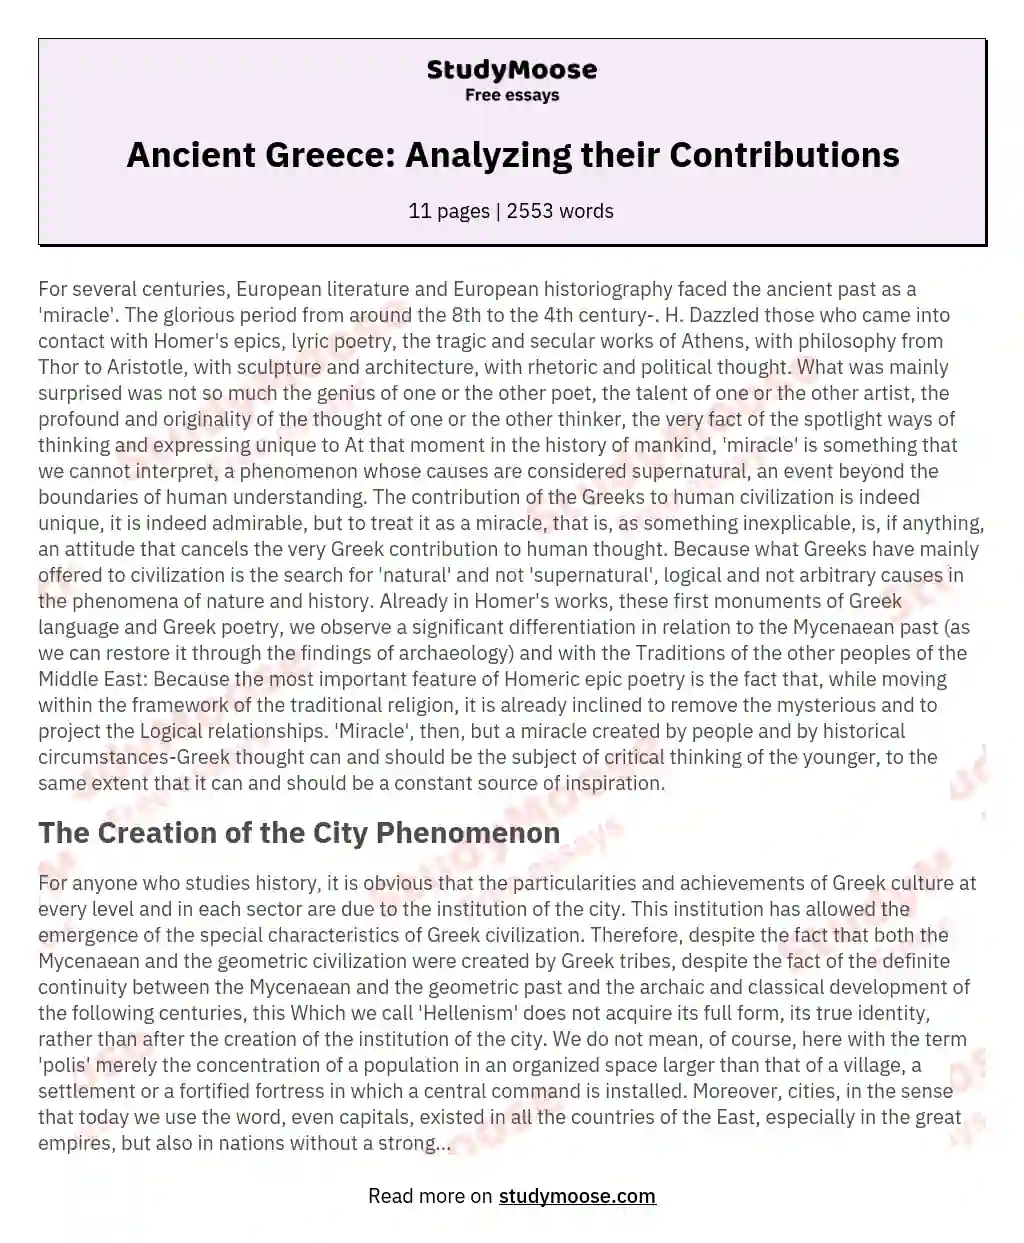 Ancient Greece: Analyzing their Contributions essay